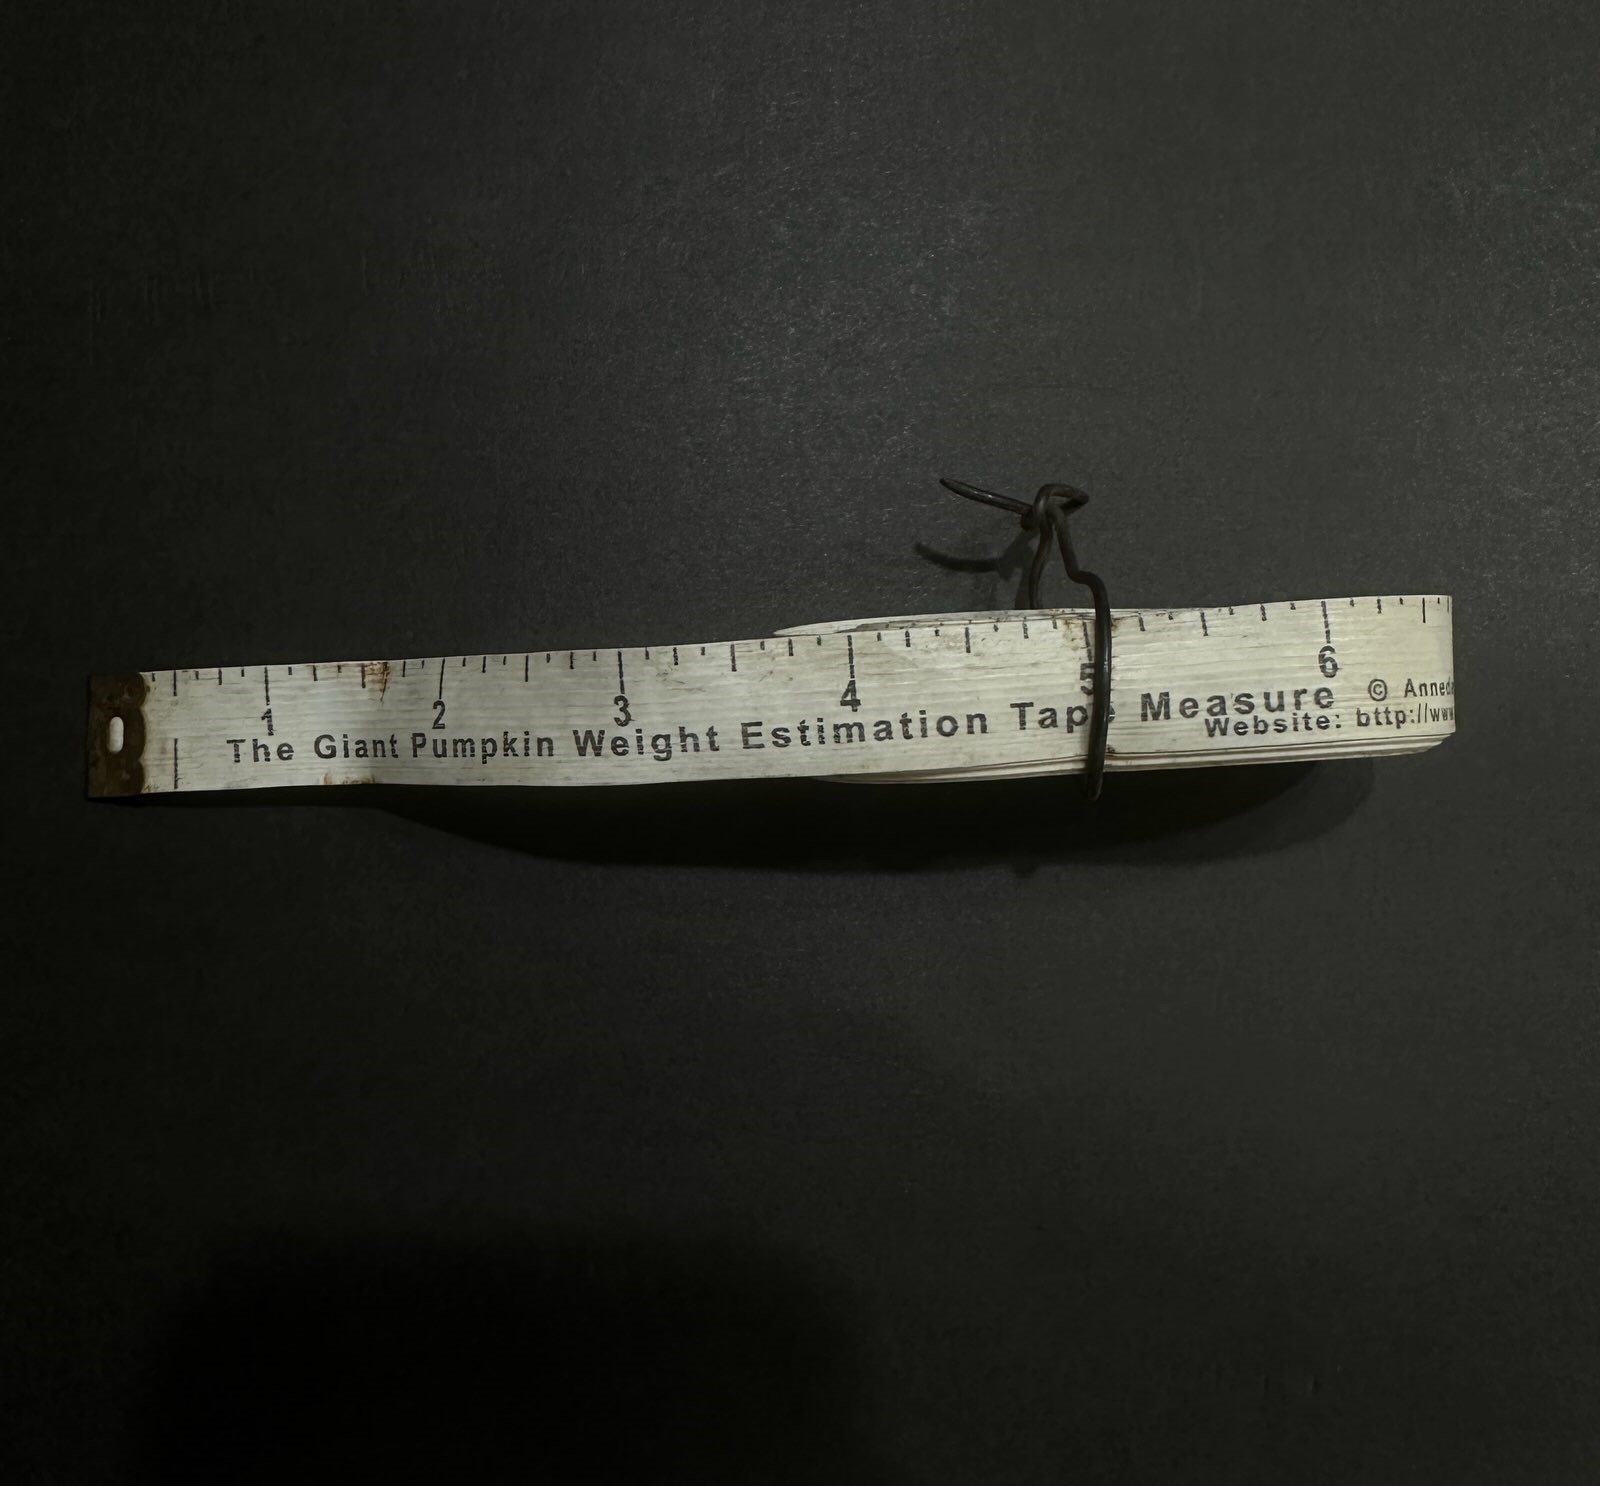 Photo of a tape measure wrapped up by a thin piece of black wiring.